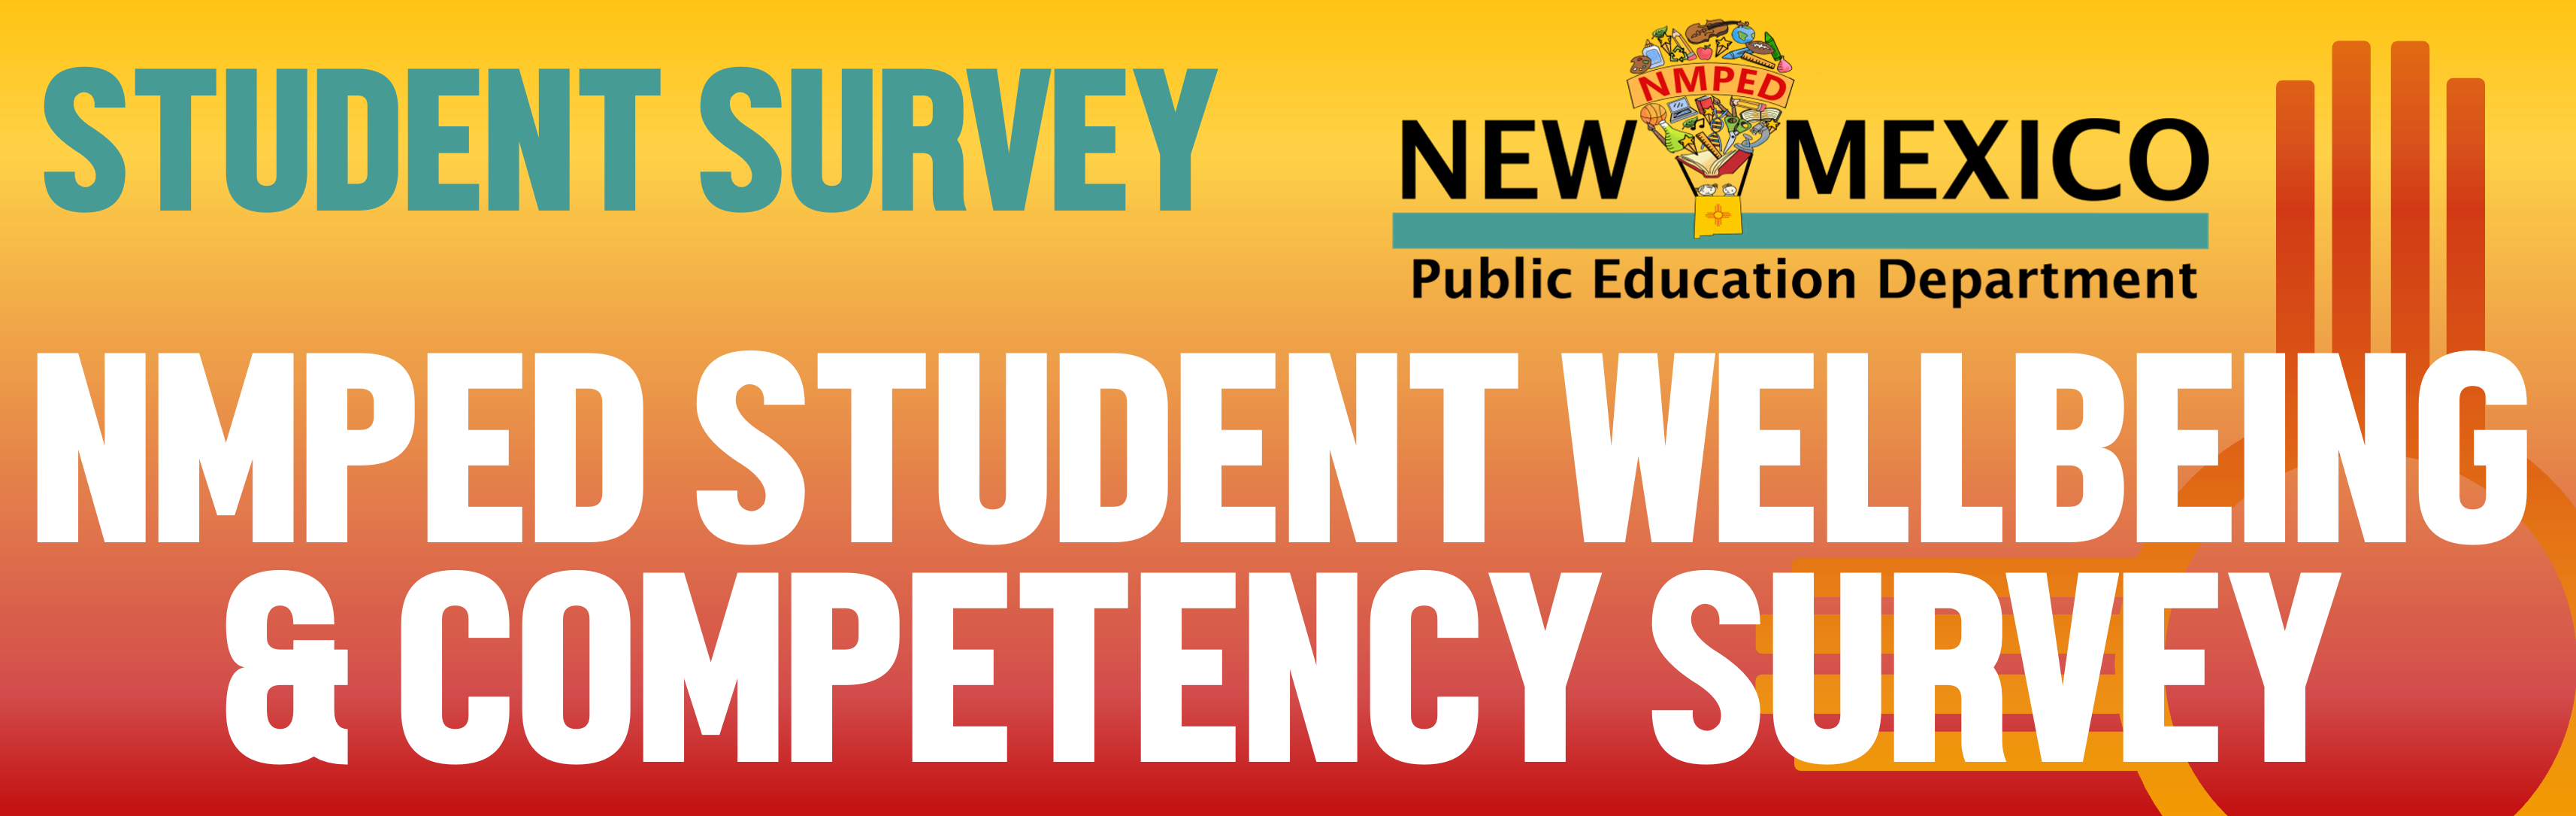 Student Survey, NMPED Student Wellbeing & Competency Survey